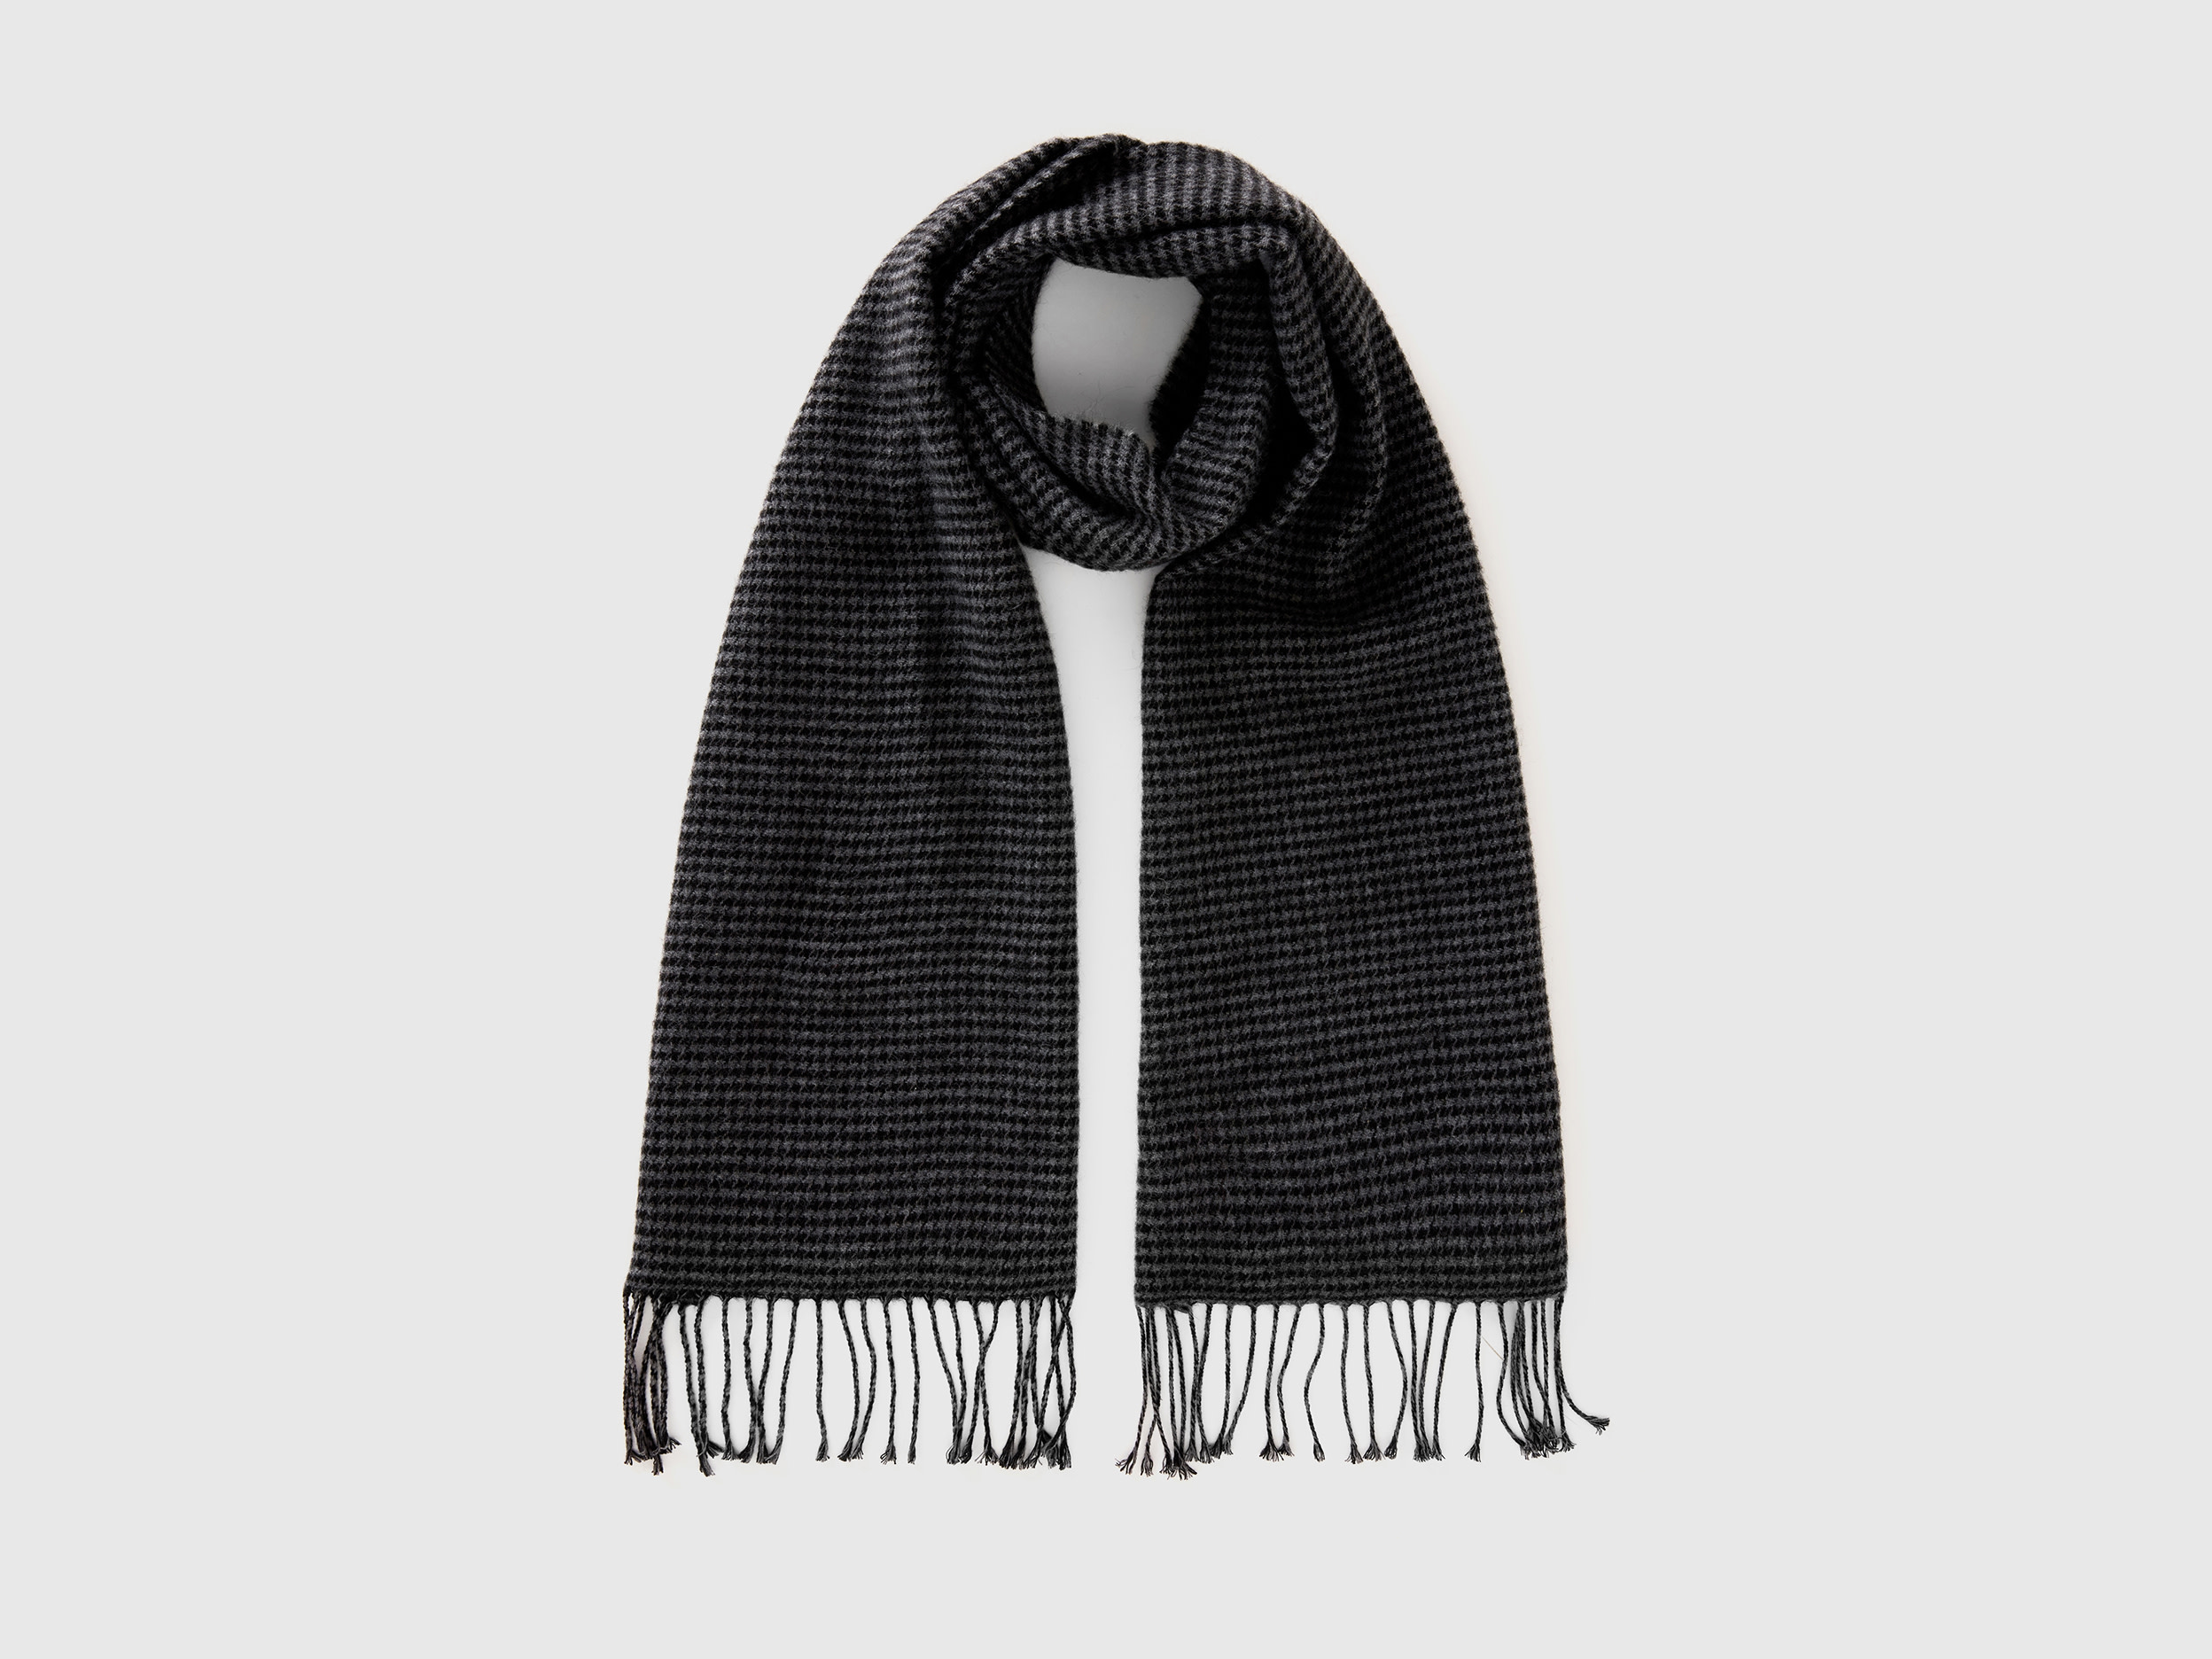 Benetton, Houndstooth Scarf In Recycled Cotton Blend, size OS, Black, Men